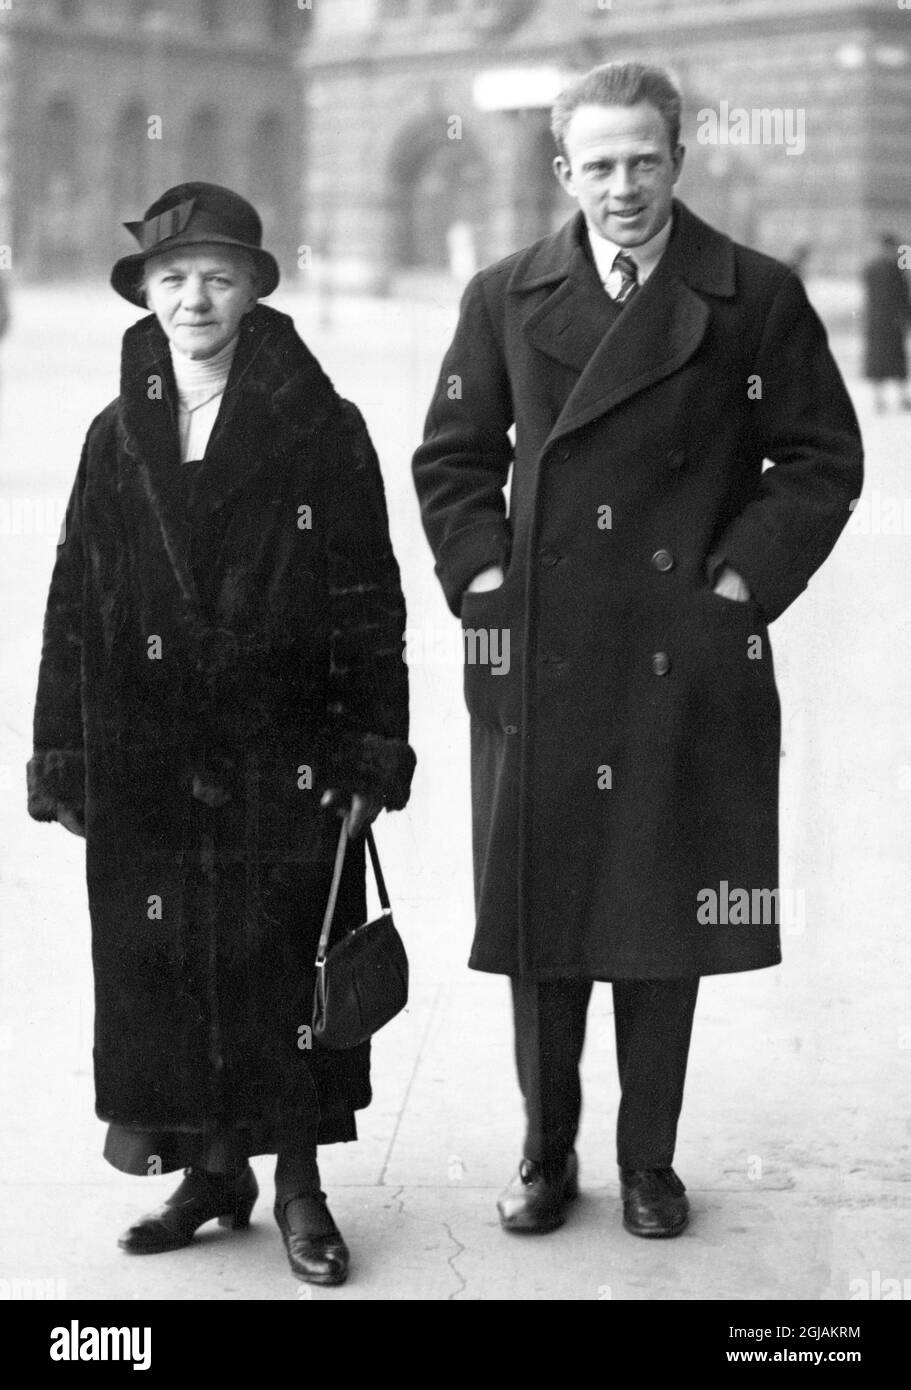 Werner Heisenberg, German physicist who received the Nobel Prize in Physics 1932 for his basic contributions to quantum mechanics, here with his mother. Stock Photo